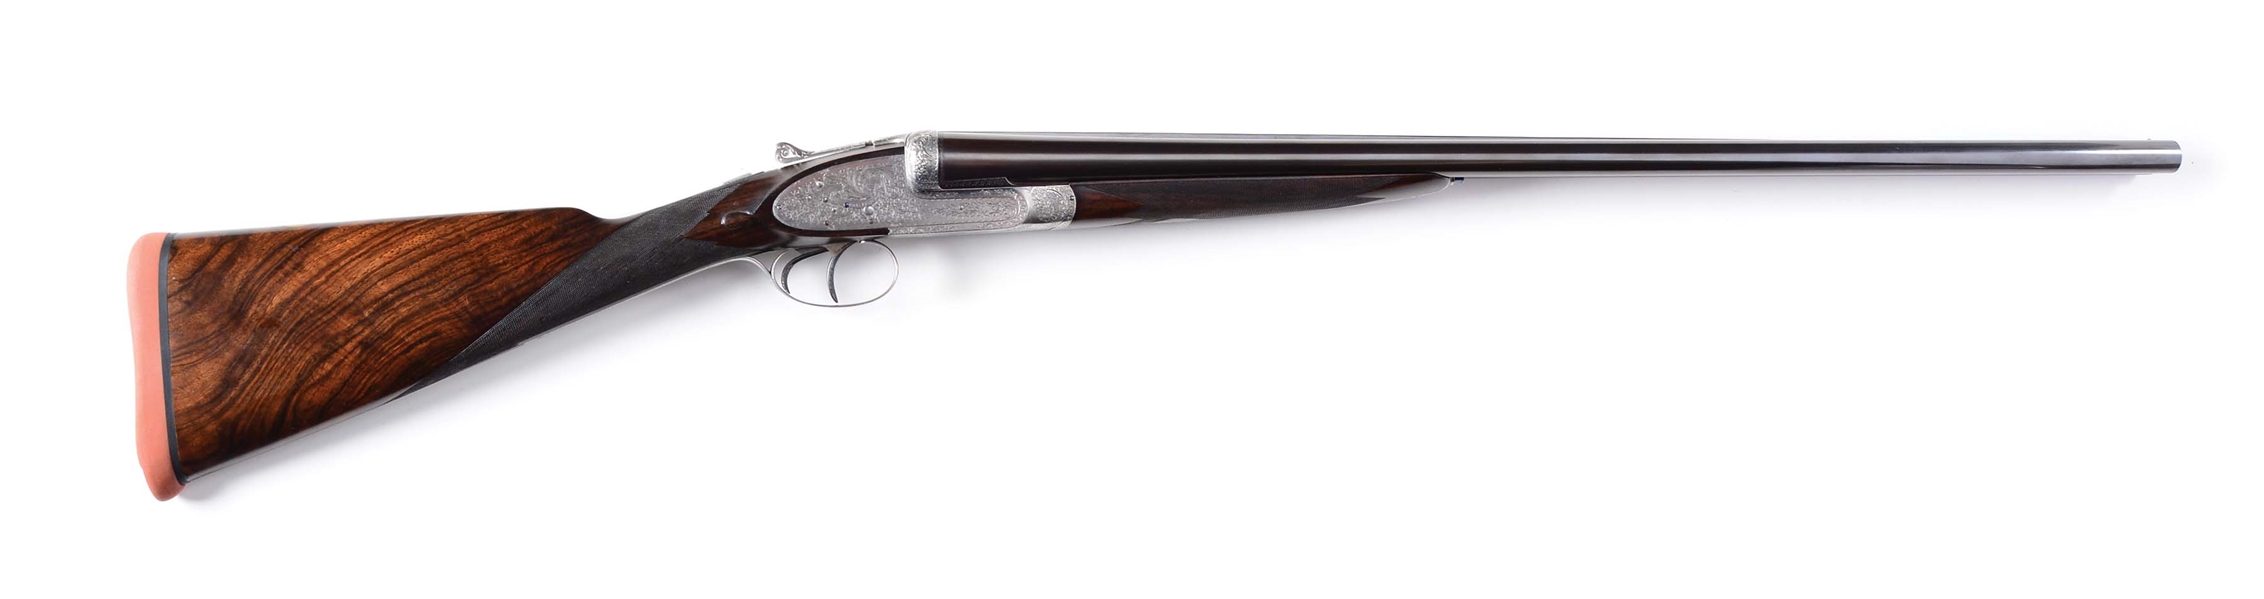 (C) SUPERB QUALITY GALAND "REGLE AU TIR" SIDELOCK EJECTOR PIGEON SHOTGUN WITH FINE ENGRAVING AND CARVED FENCES BY H. LEUMERS. 